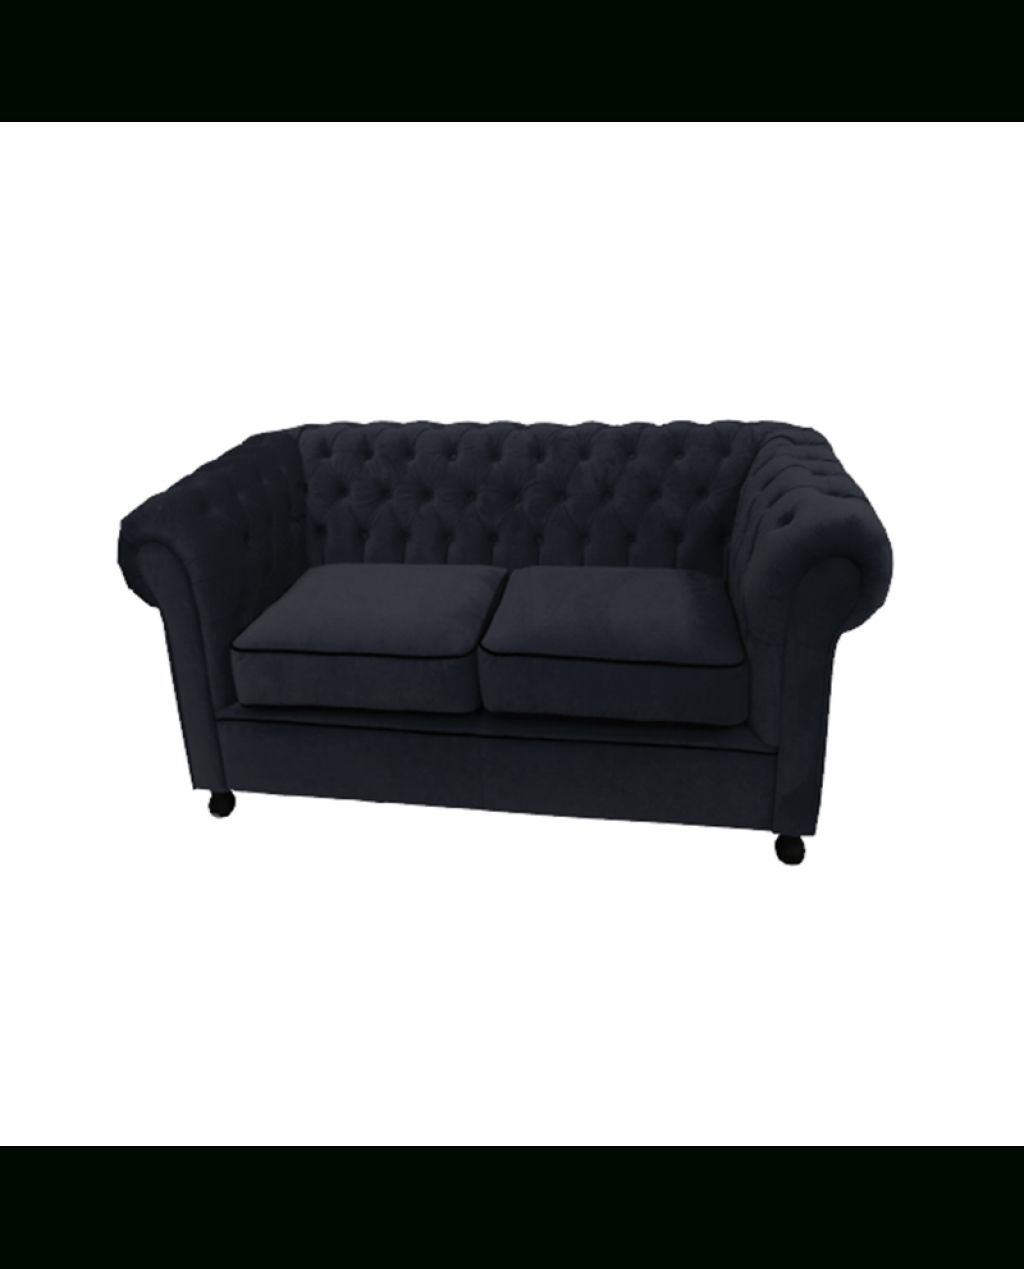 Black Velvet Chesterfield Style 2 Seater Sofa Hire With Black 2 Seater Sofas (View 8 of 30)